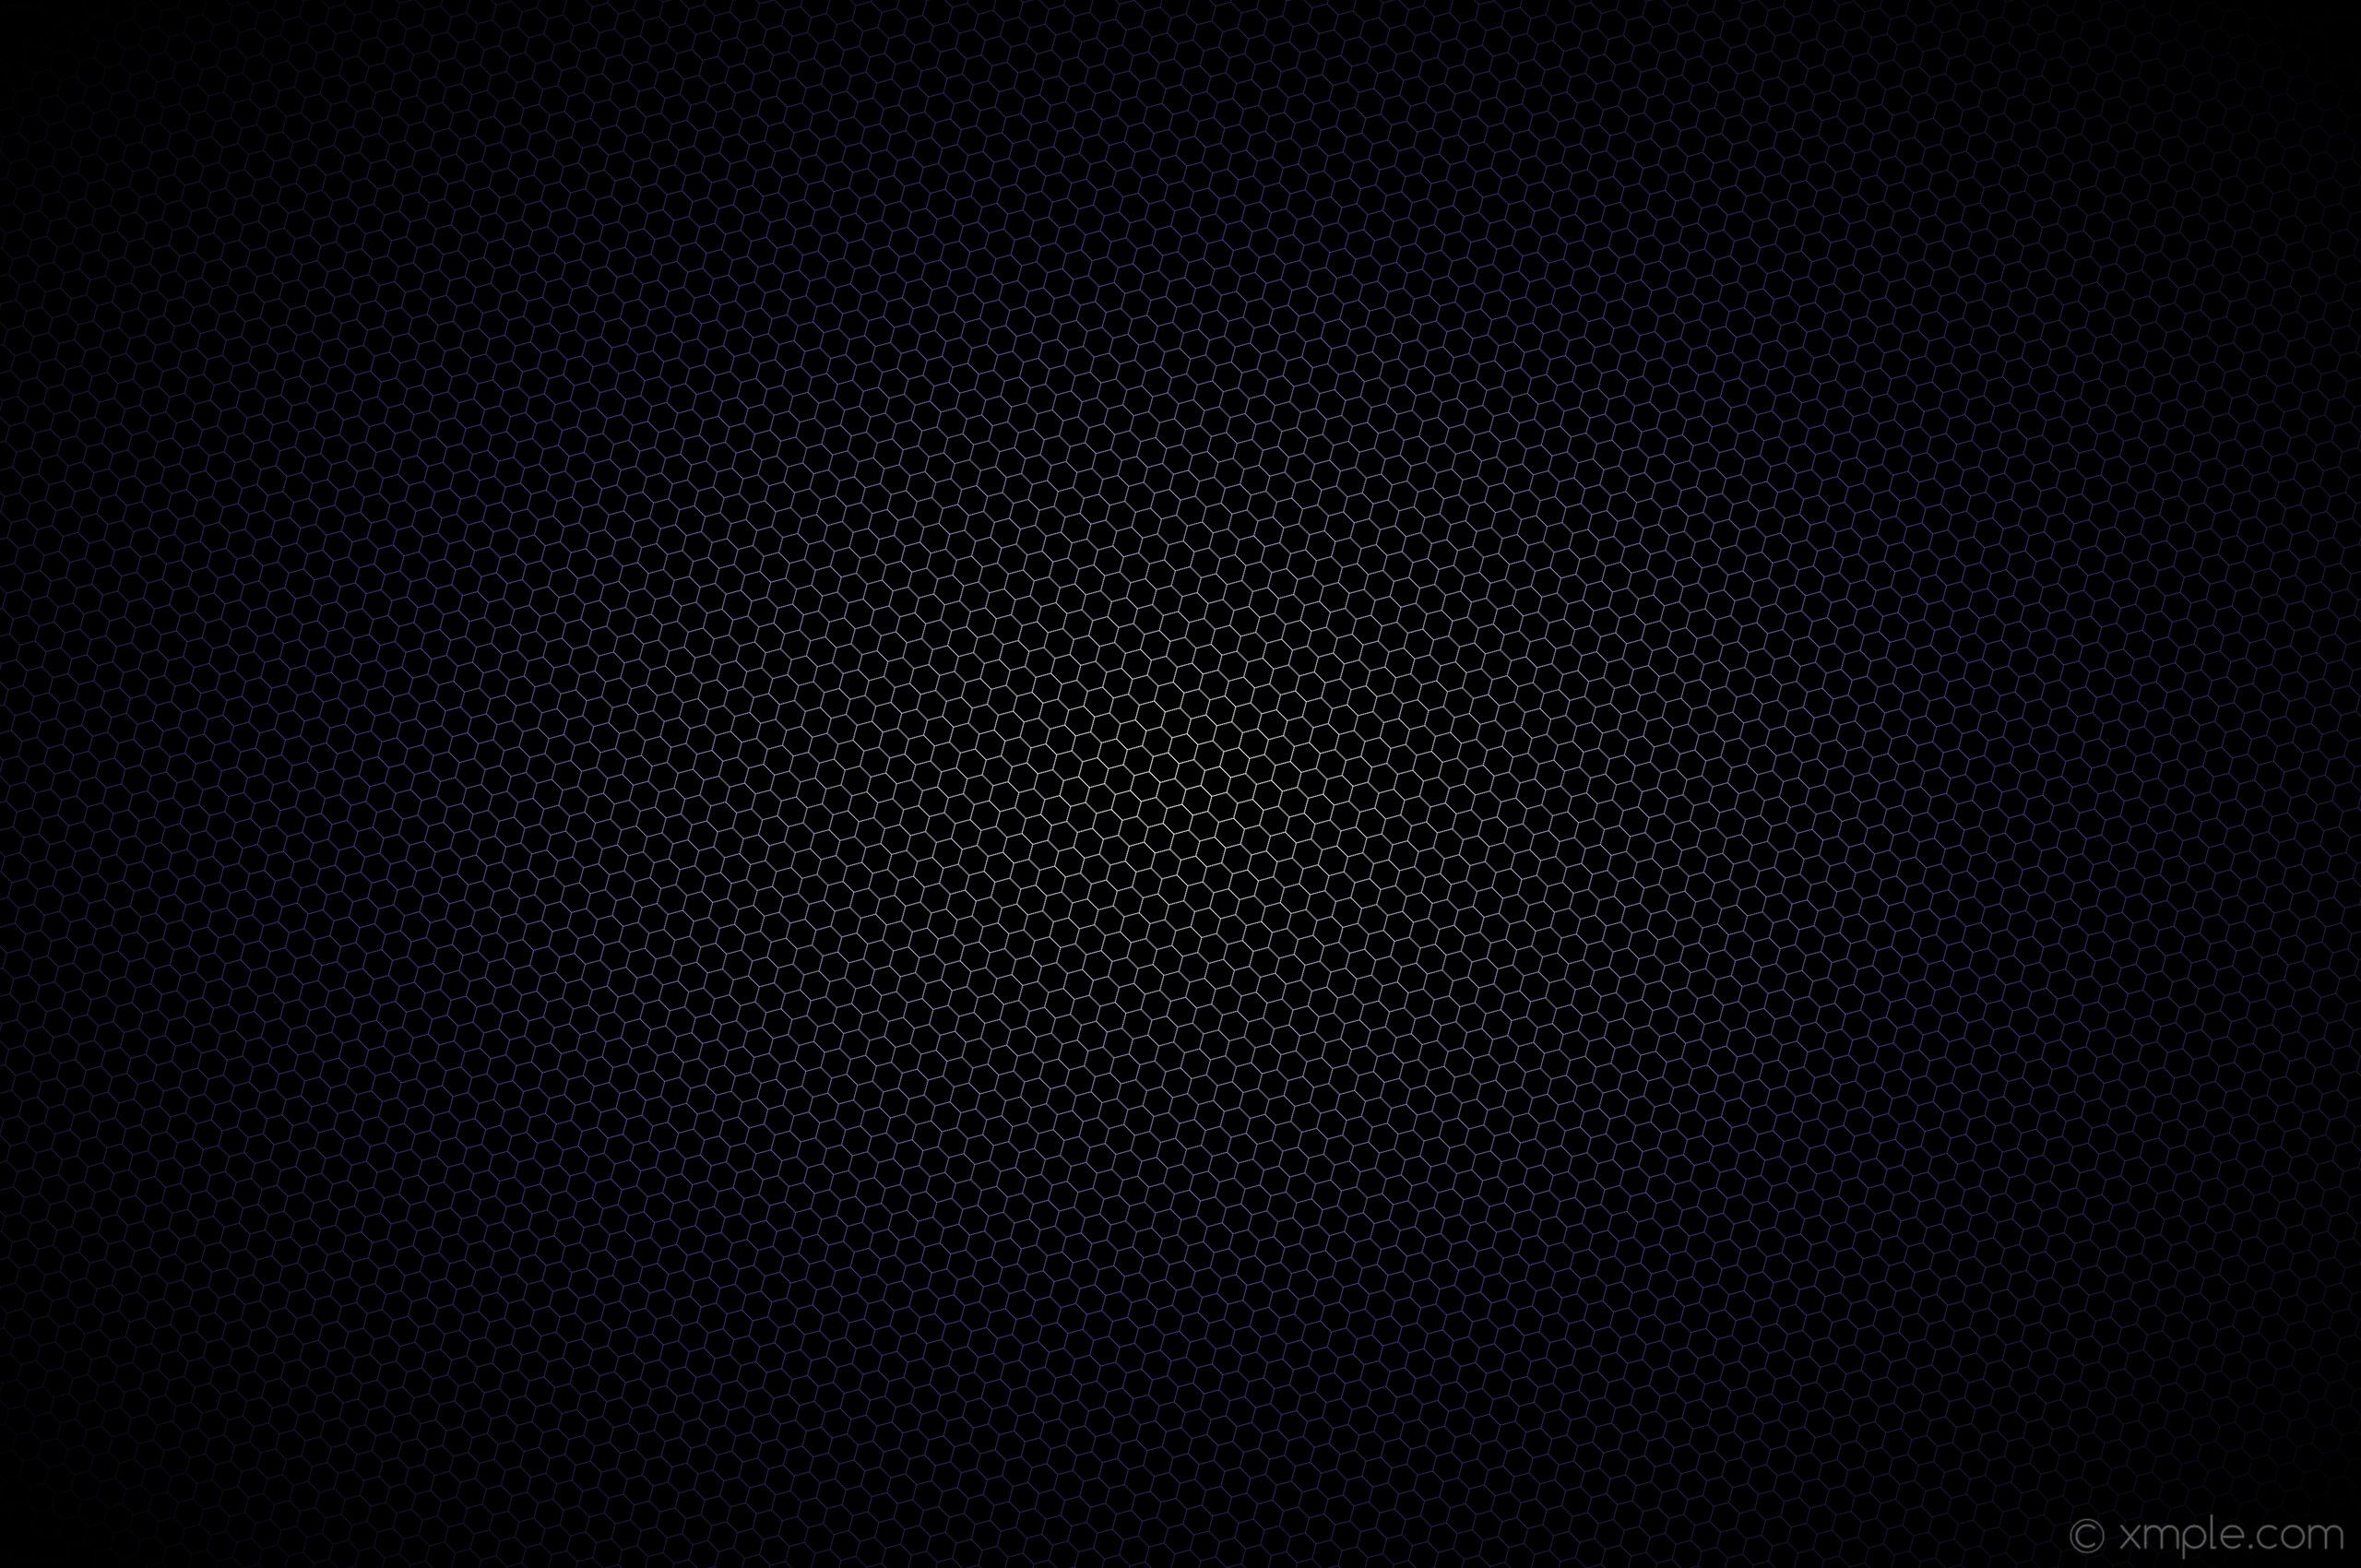 A black background with some holes - Chromebook